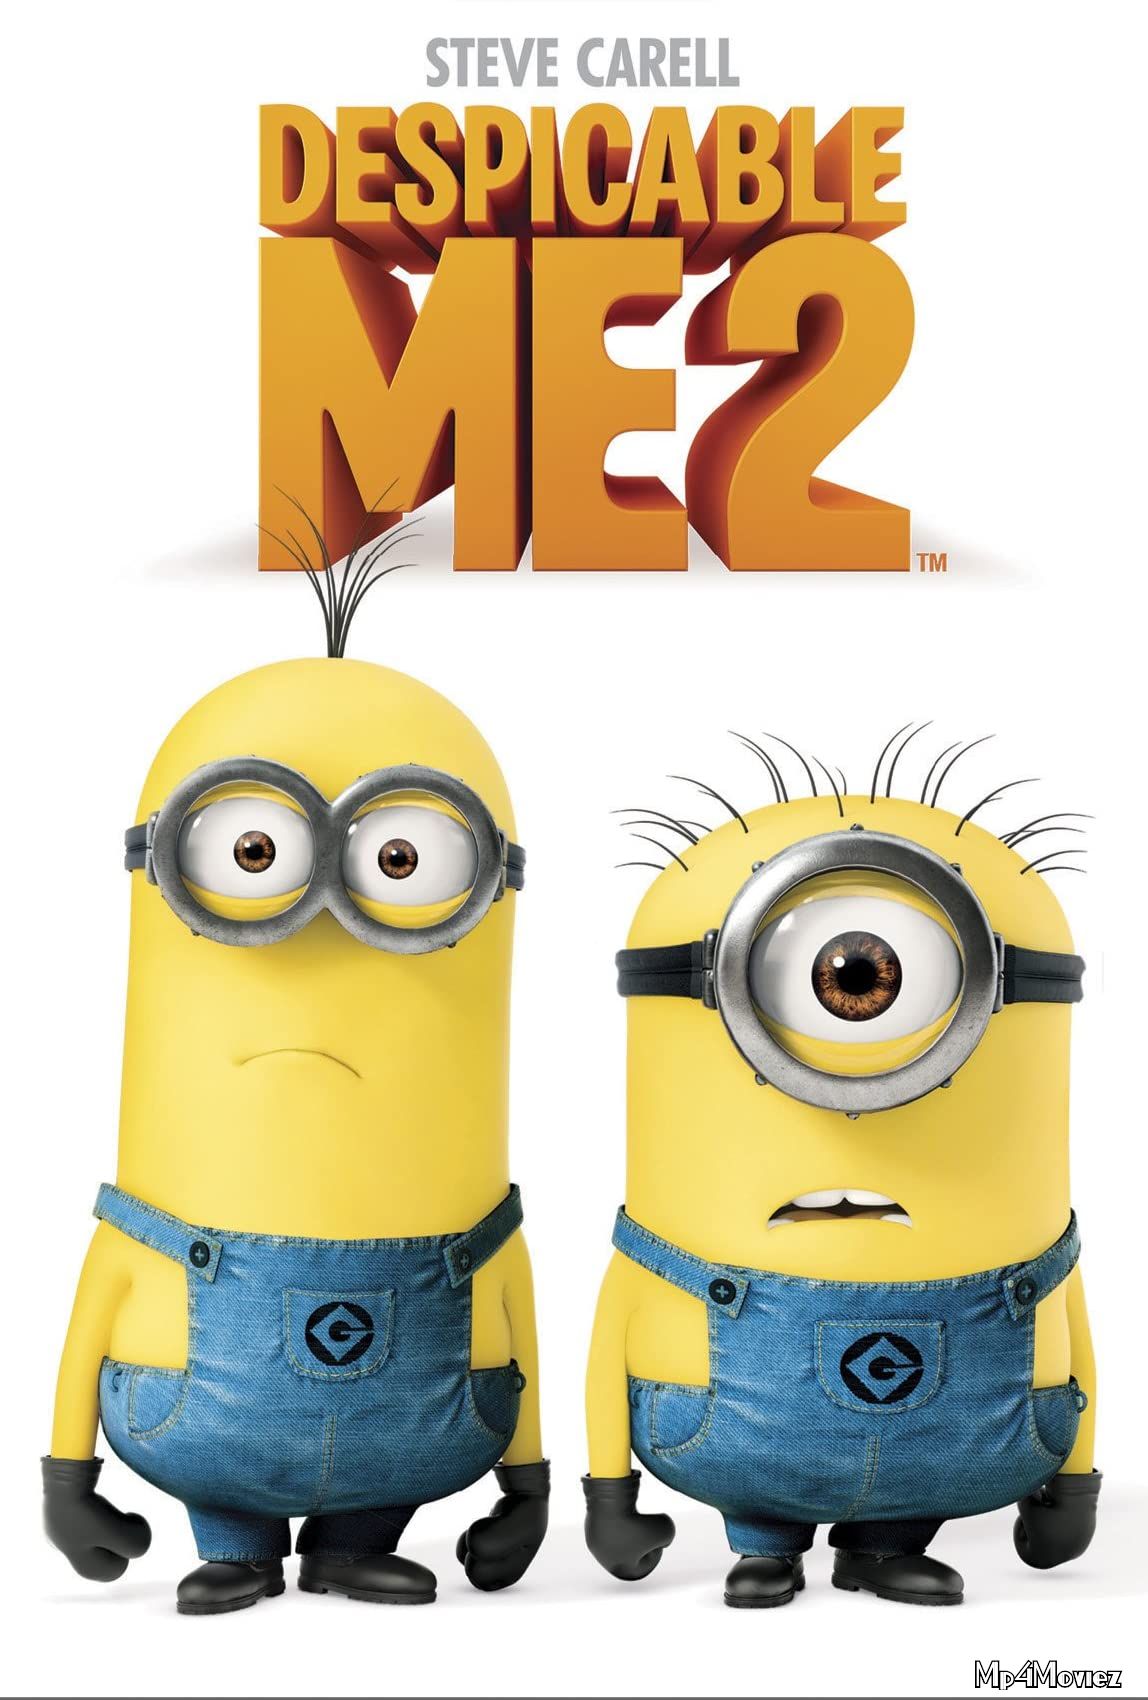 Despicable Me 2 2013 Hindi Dubbed Full Movie download full movie